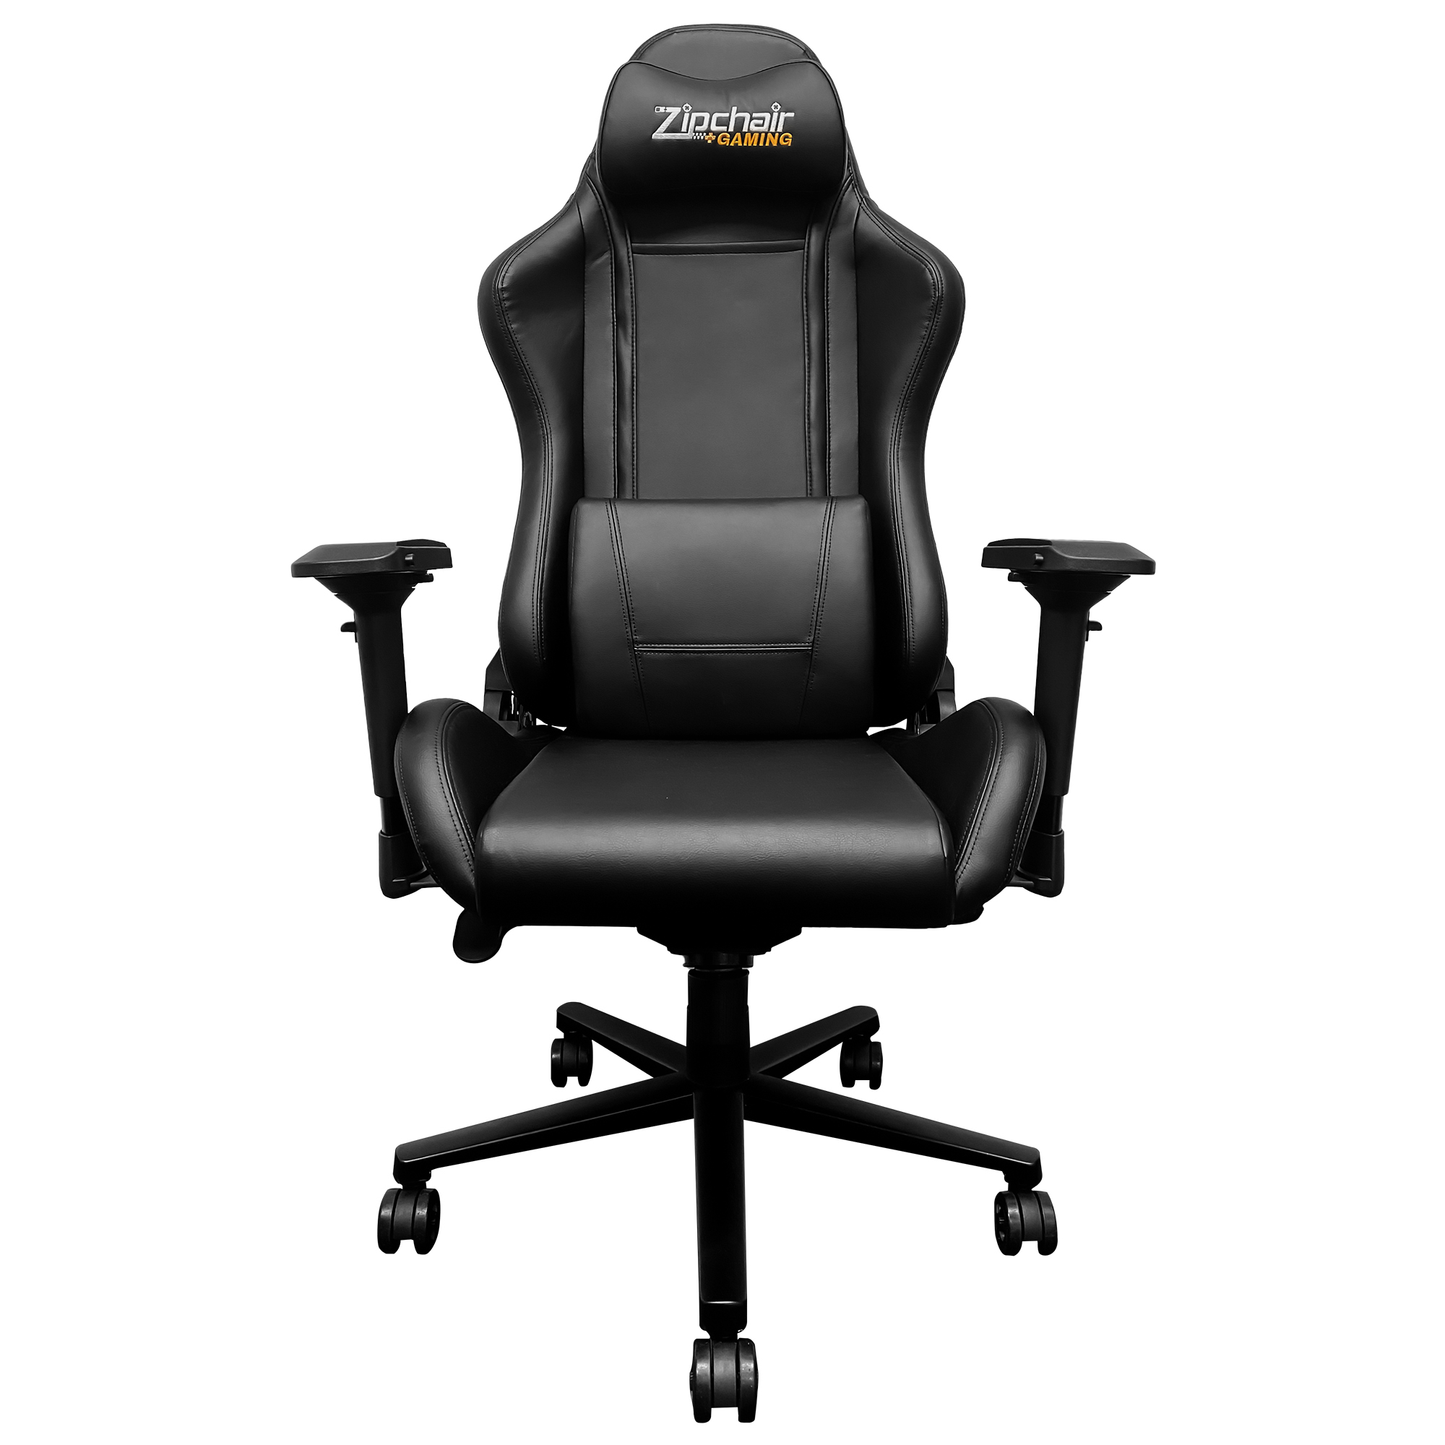 Xpression Pro Gaming Chair with Boise State Broncos Logo